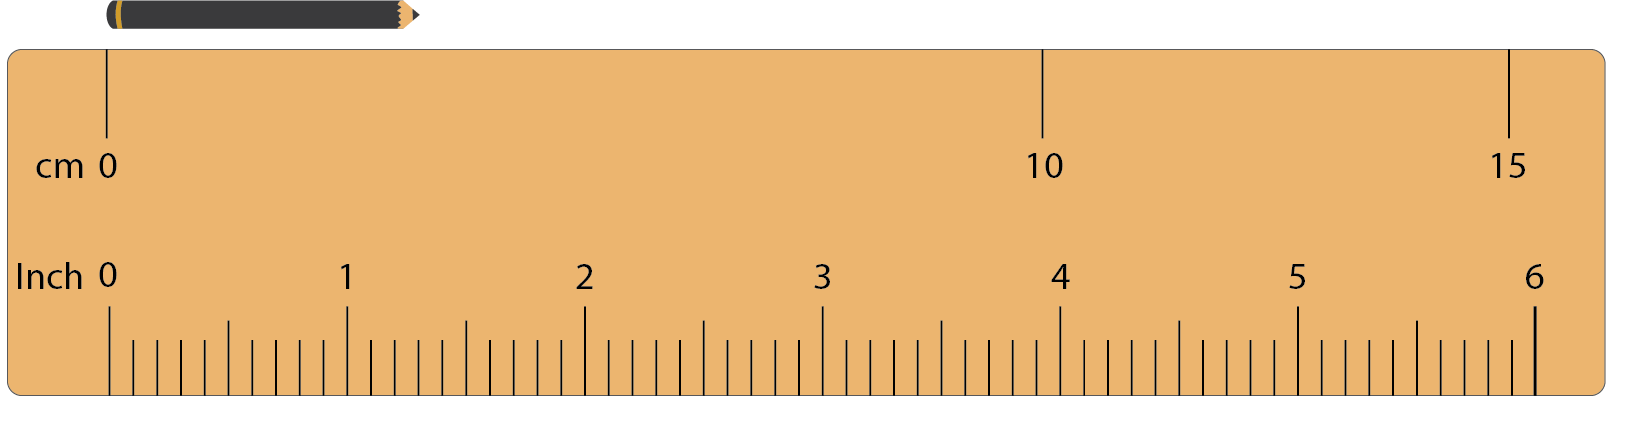  Image of a pencil and a ruler.